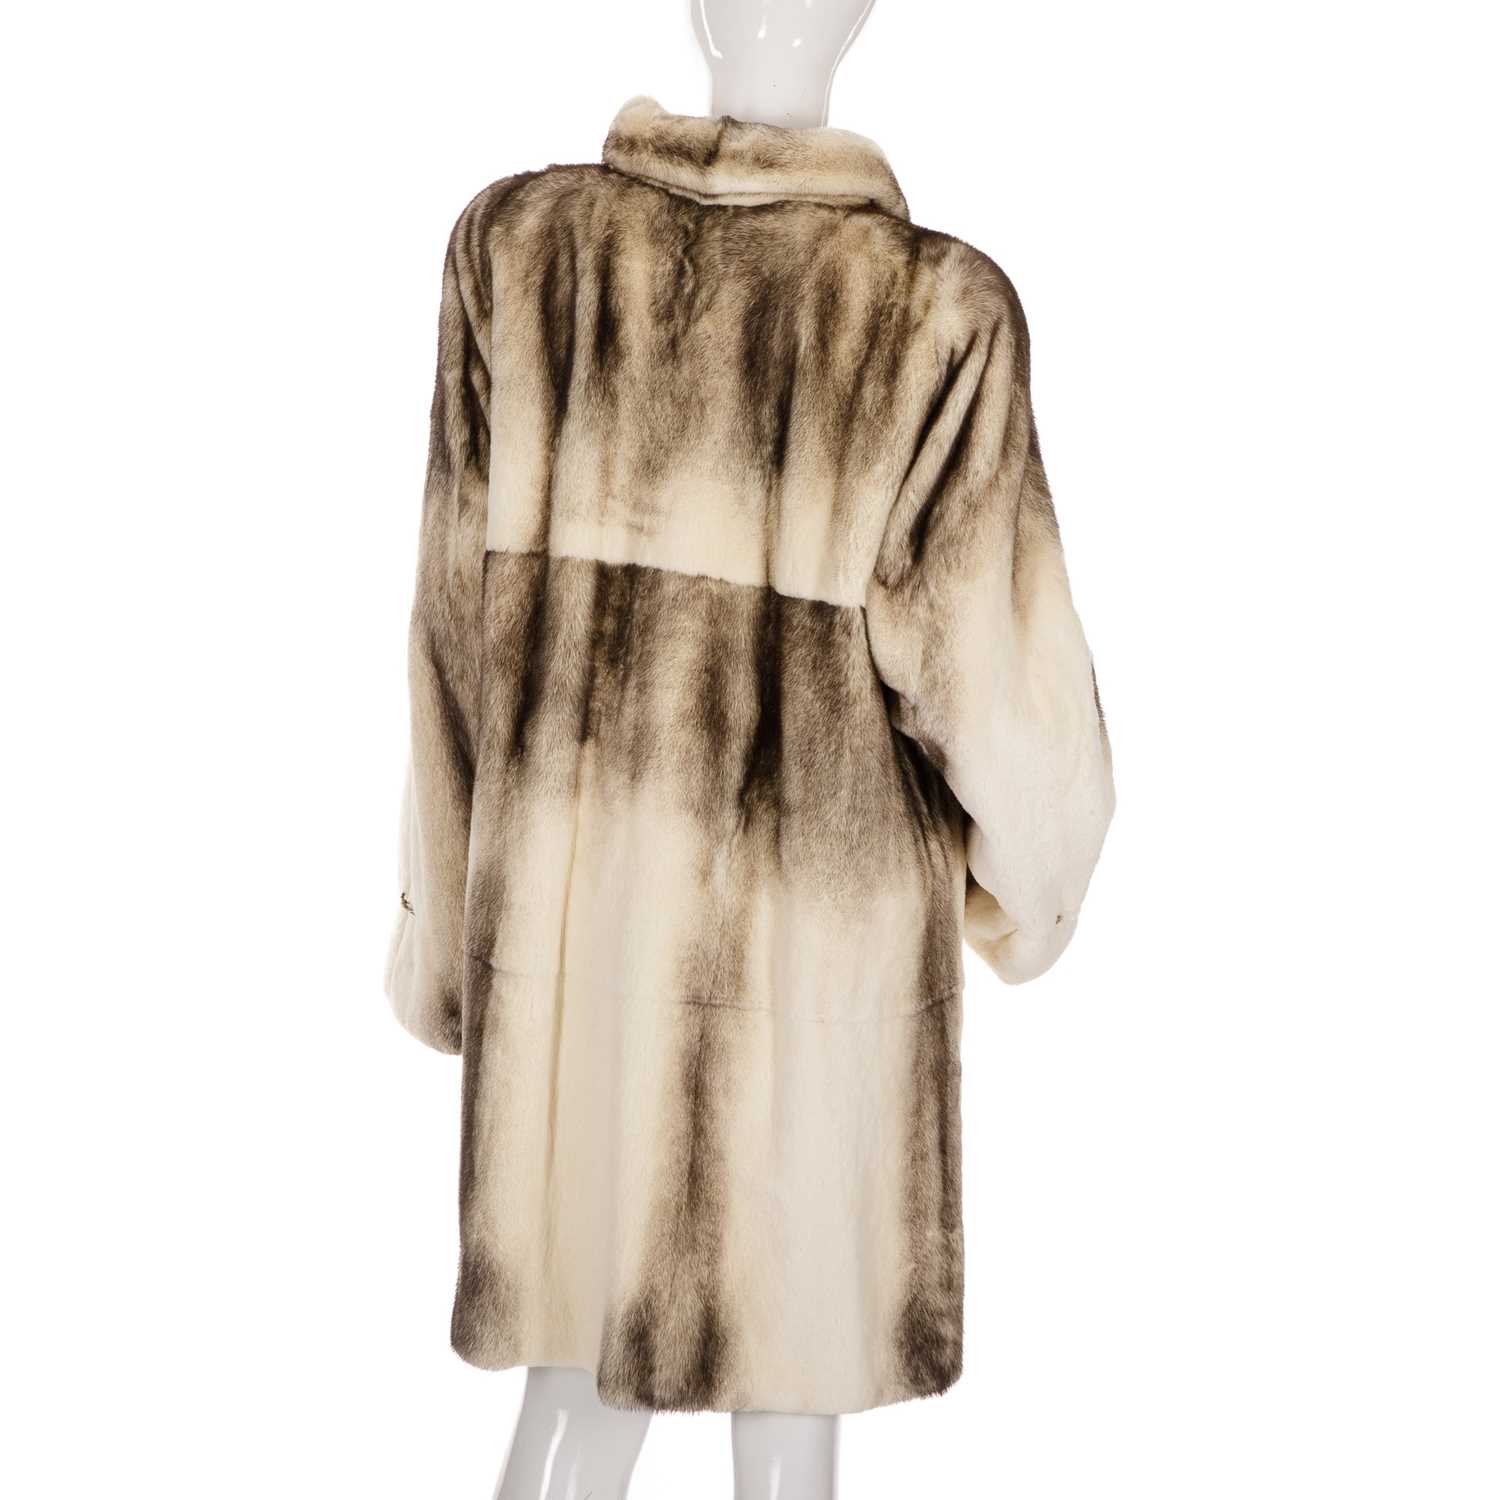 A two-tone natural white and graduated graphite sheared mink coat, featuring a short collar with - Image 2 of 4